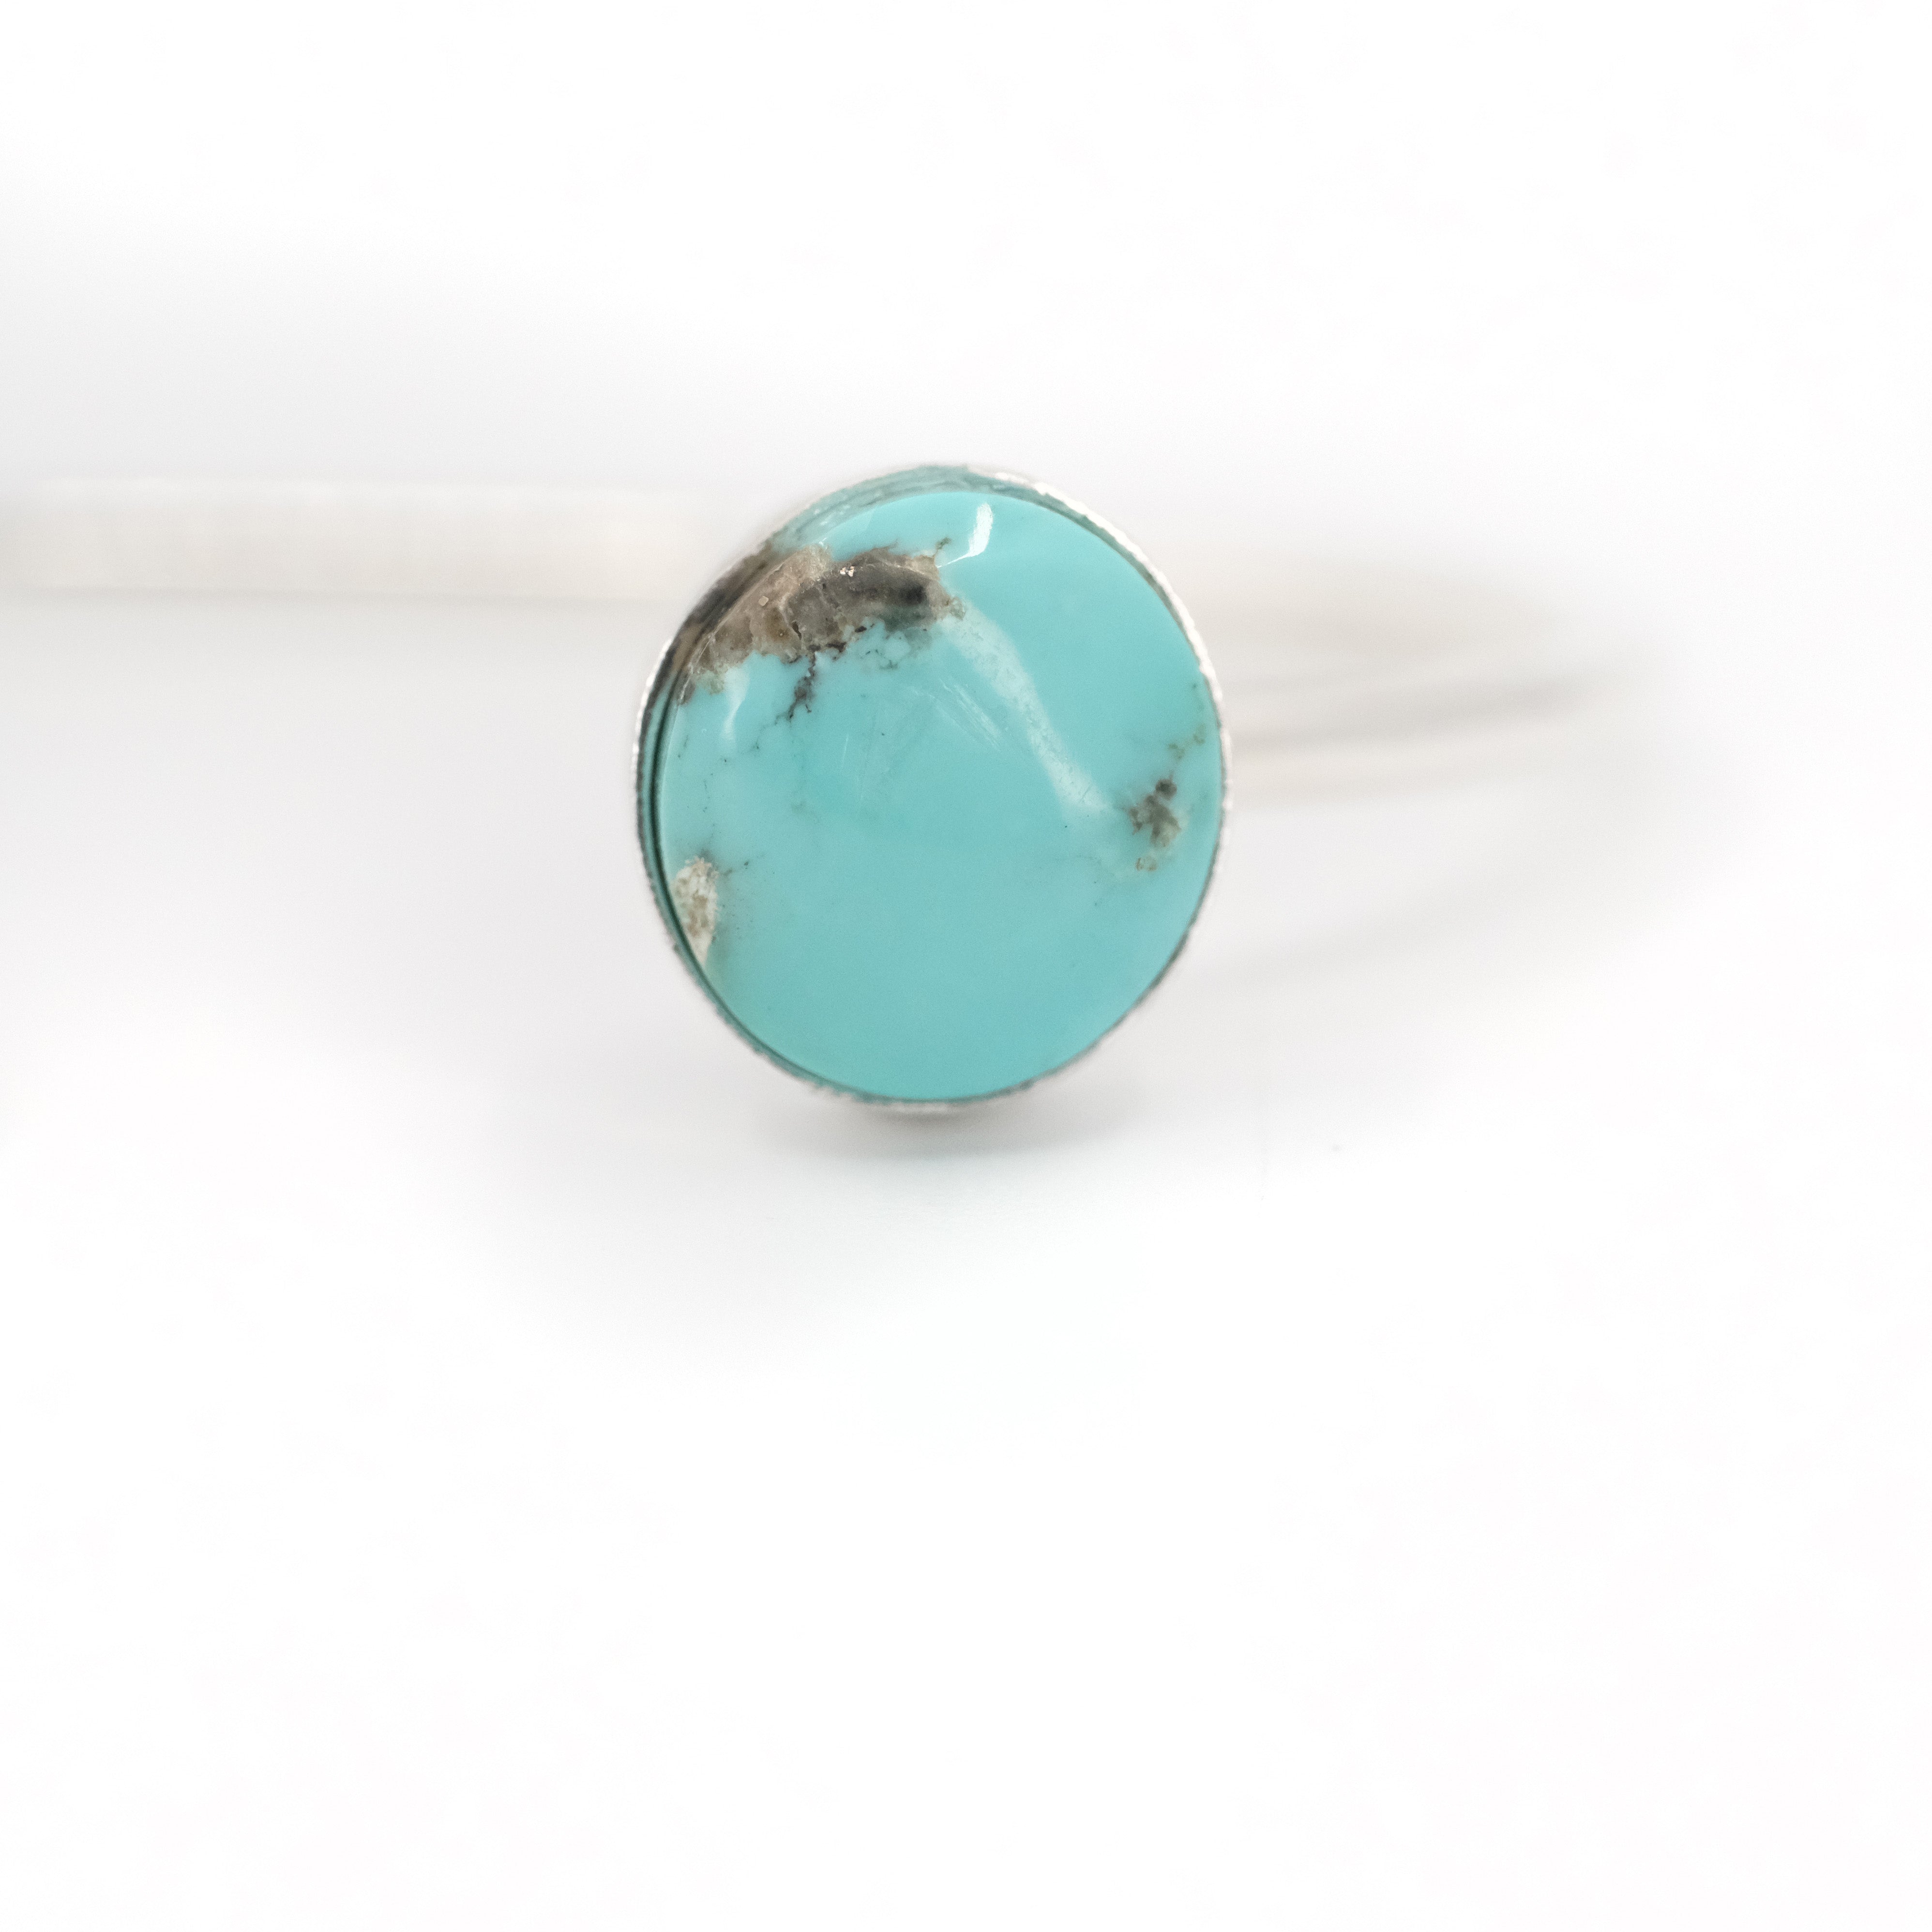 Turquoise Duo Cuff - One of a Kind